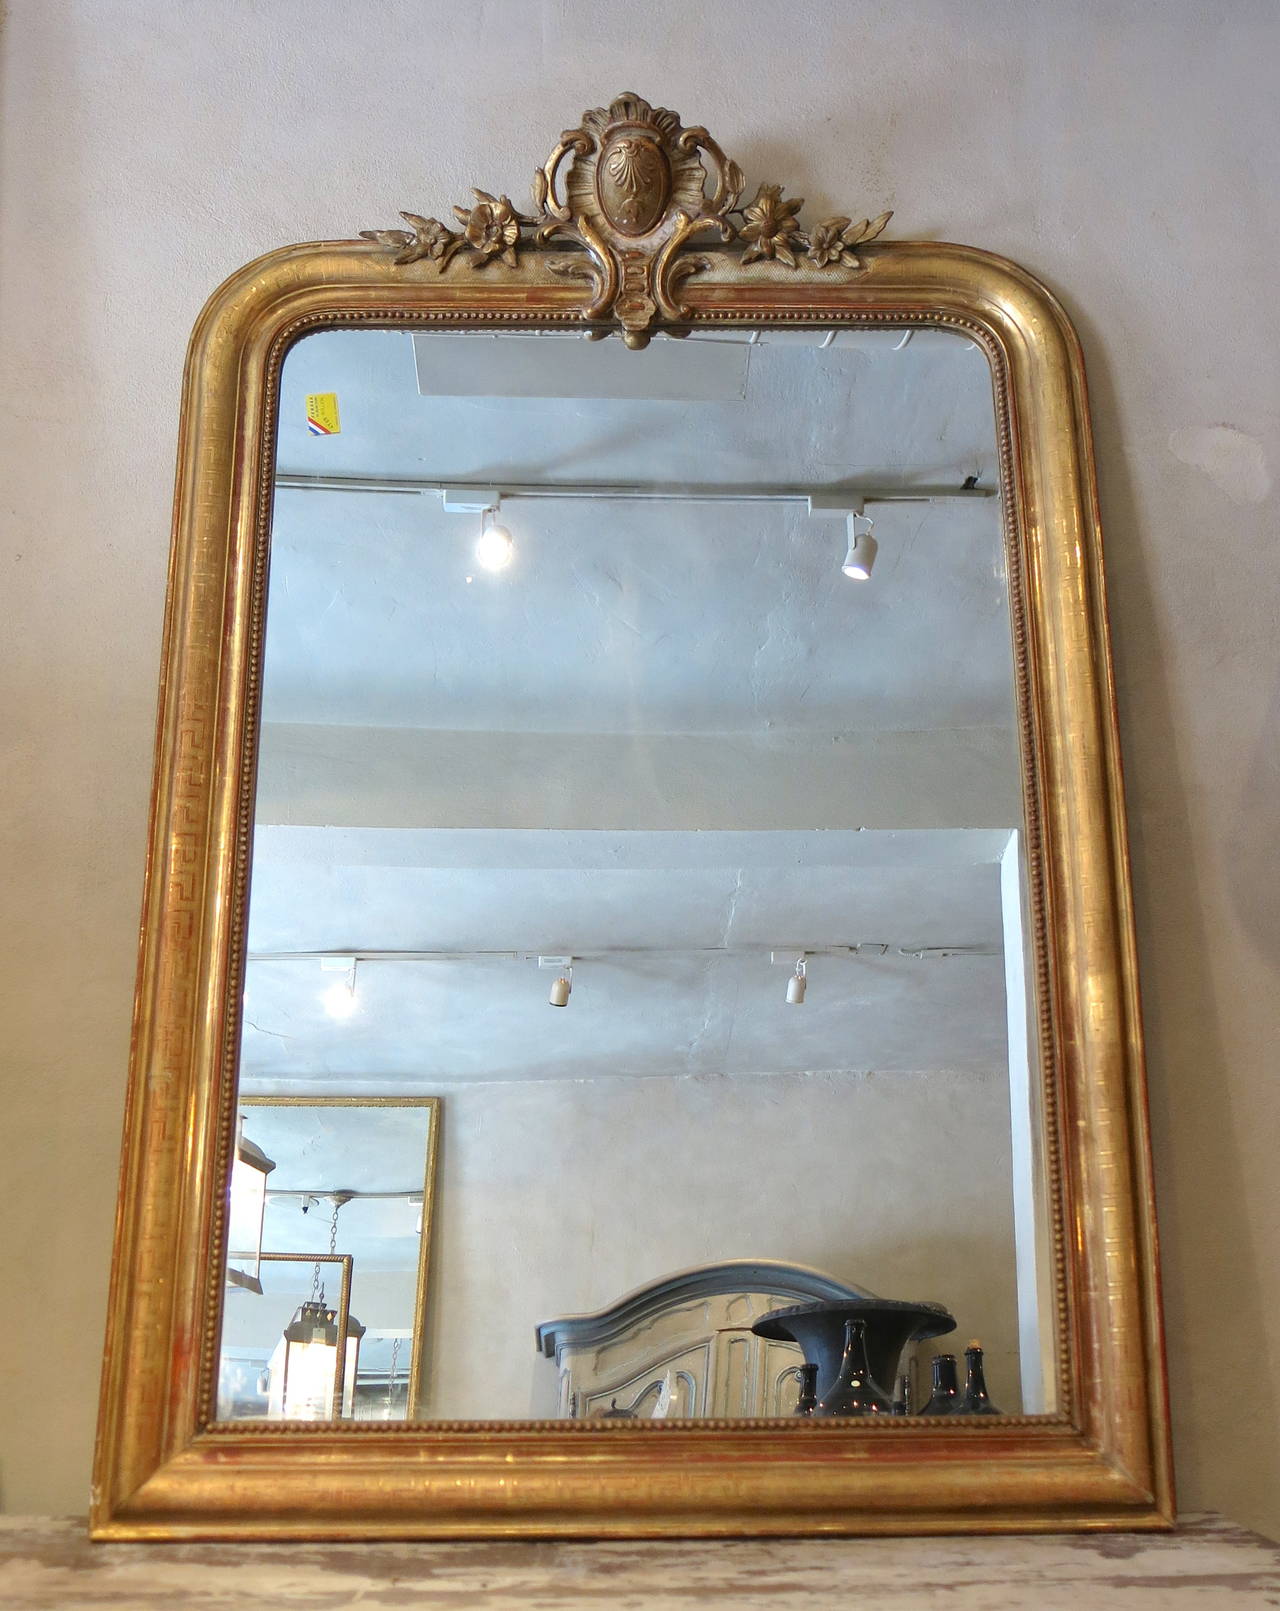 Antique French Louis XV mirror with cartouche, original old silver glass, detailed carvings, beaded frame, Greek key motif, gilded with hints of burgundy.